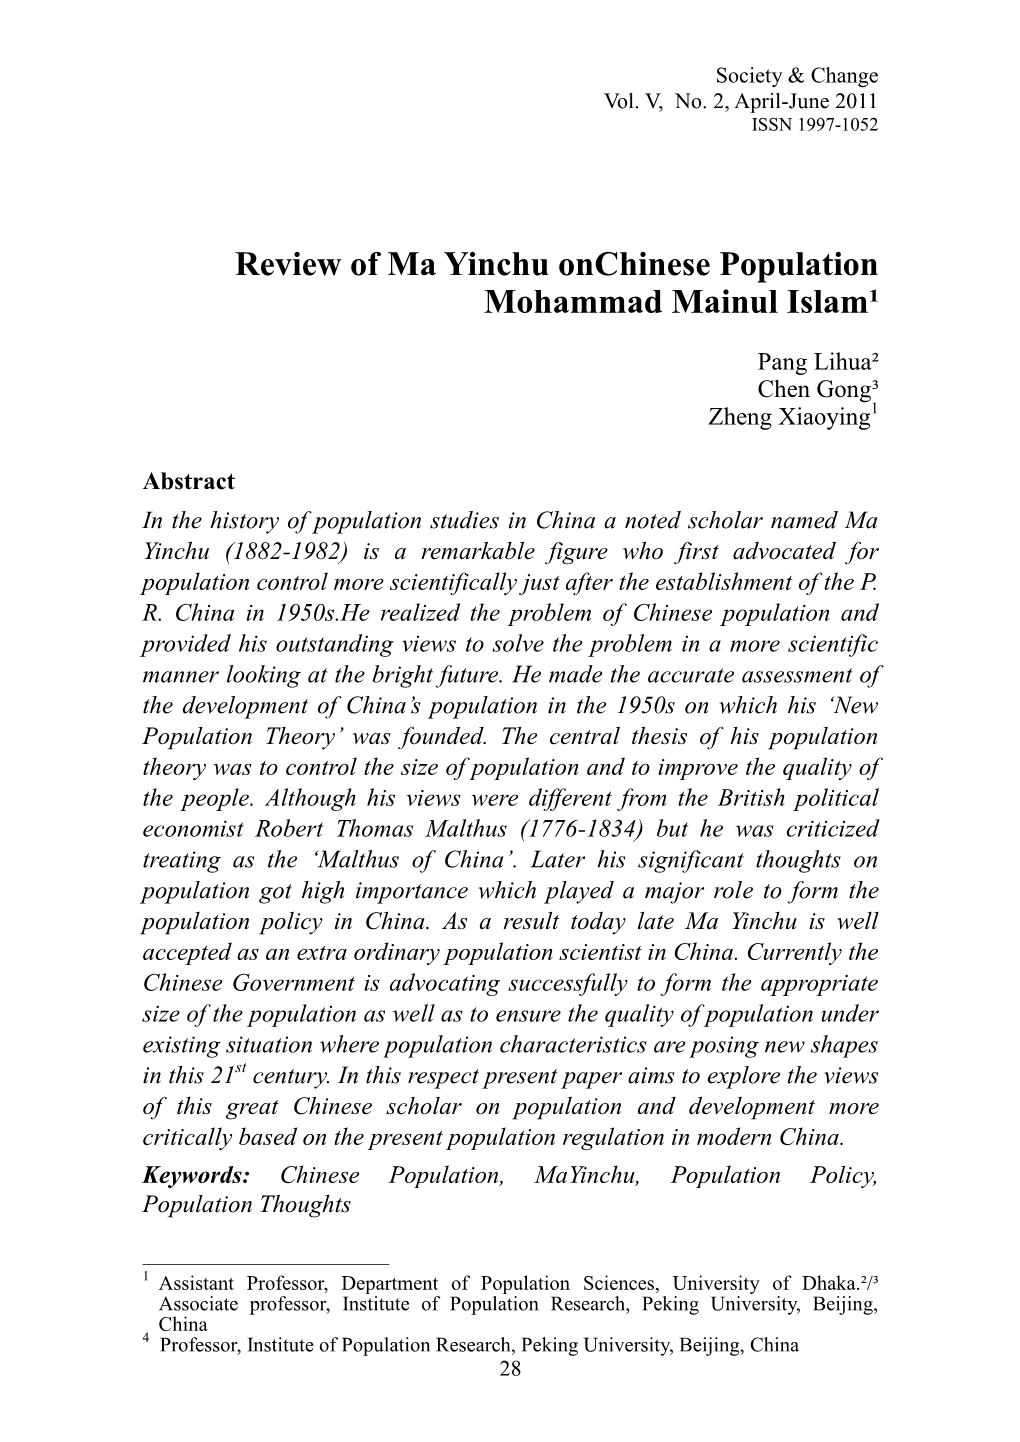 Review of Ma Yinchu on Chinese Population